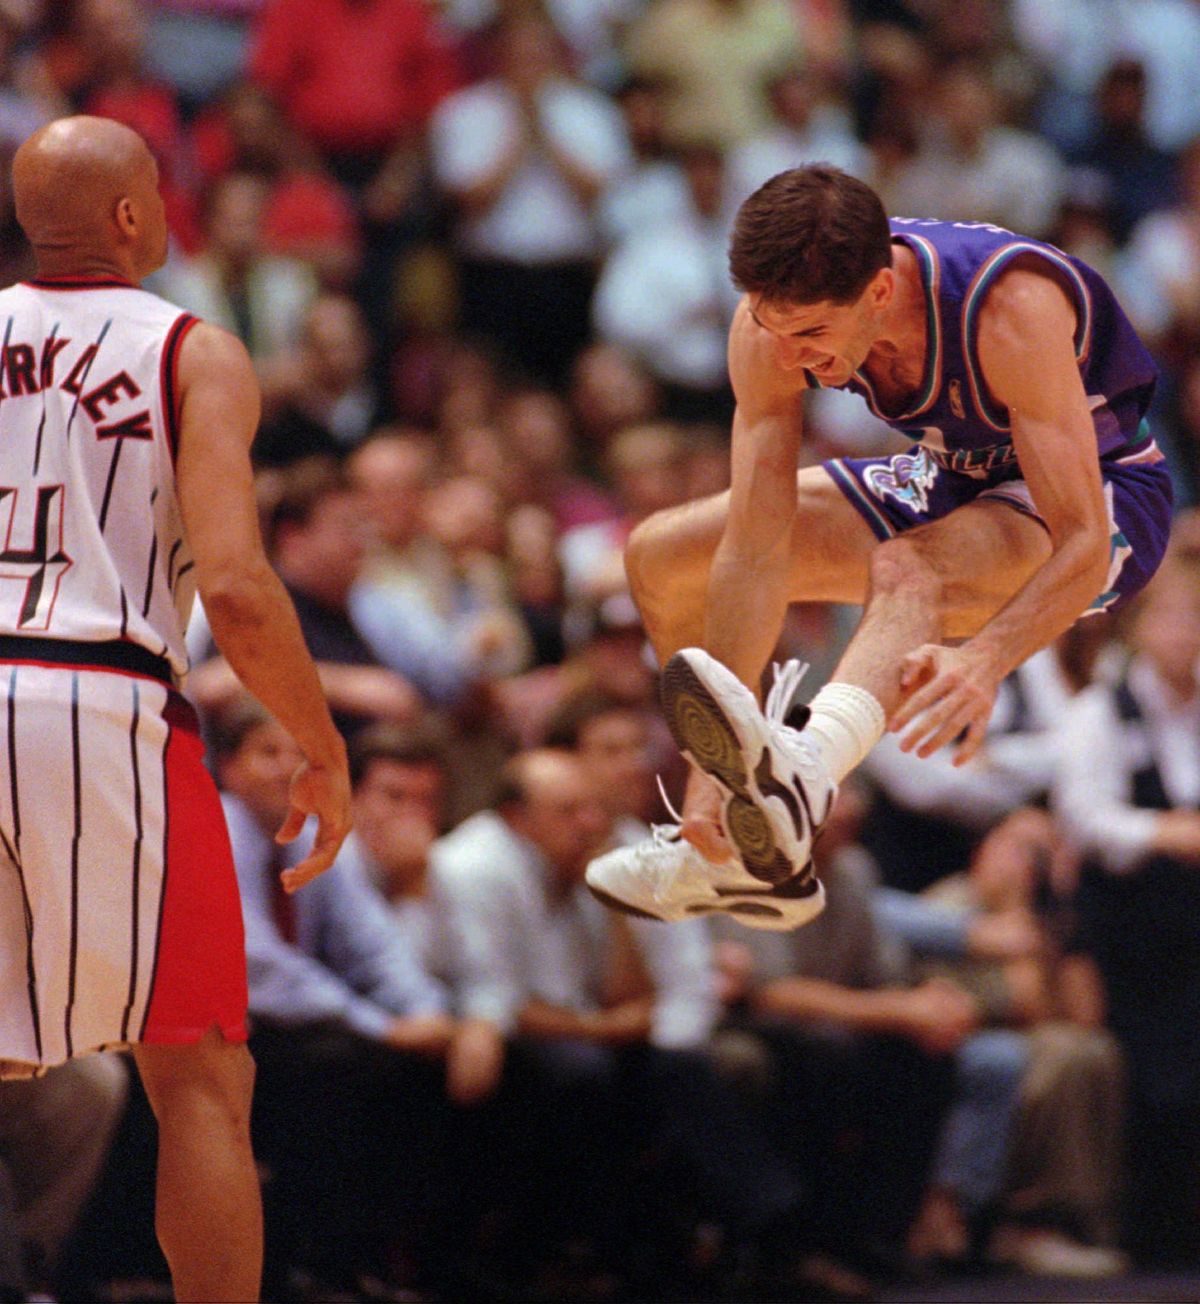 1997: Stockton launches the celebration after sinking a 3-point shot over Charles Barkley, left, at the buzzer to beat the Houston Rockets and send the Utah Jazz into the NBA Finals against the Chicago Bulls. (Associated Press / The Spokesman-Review)